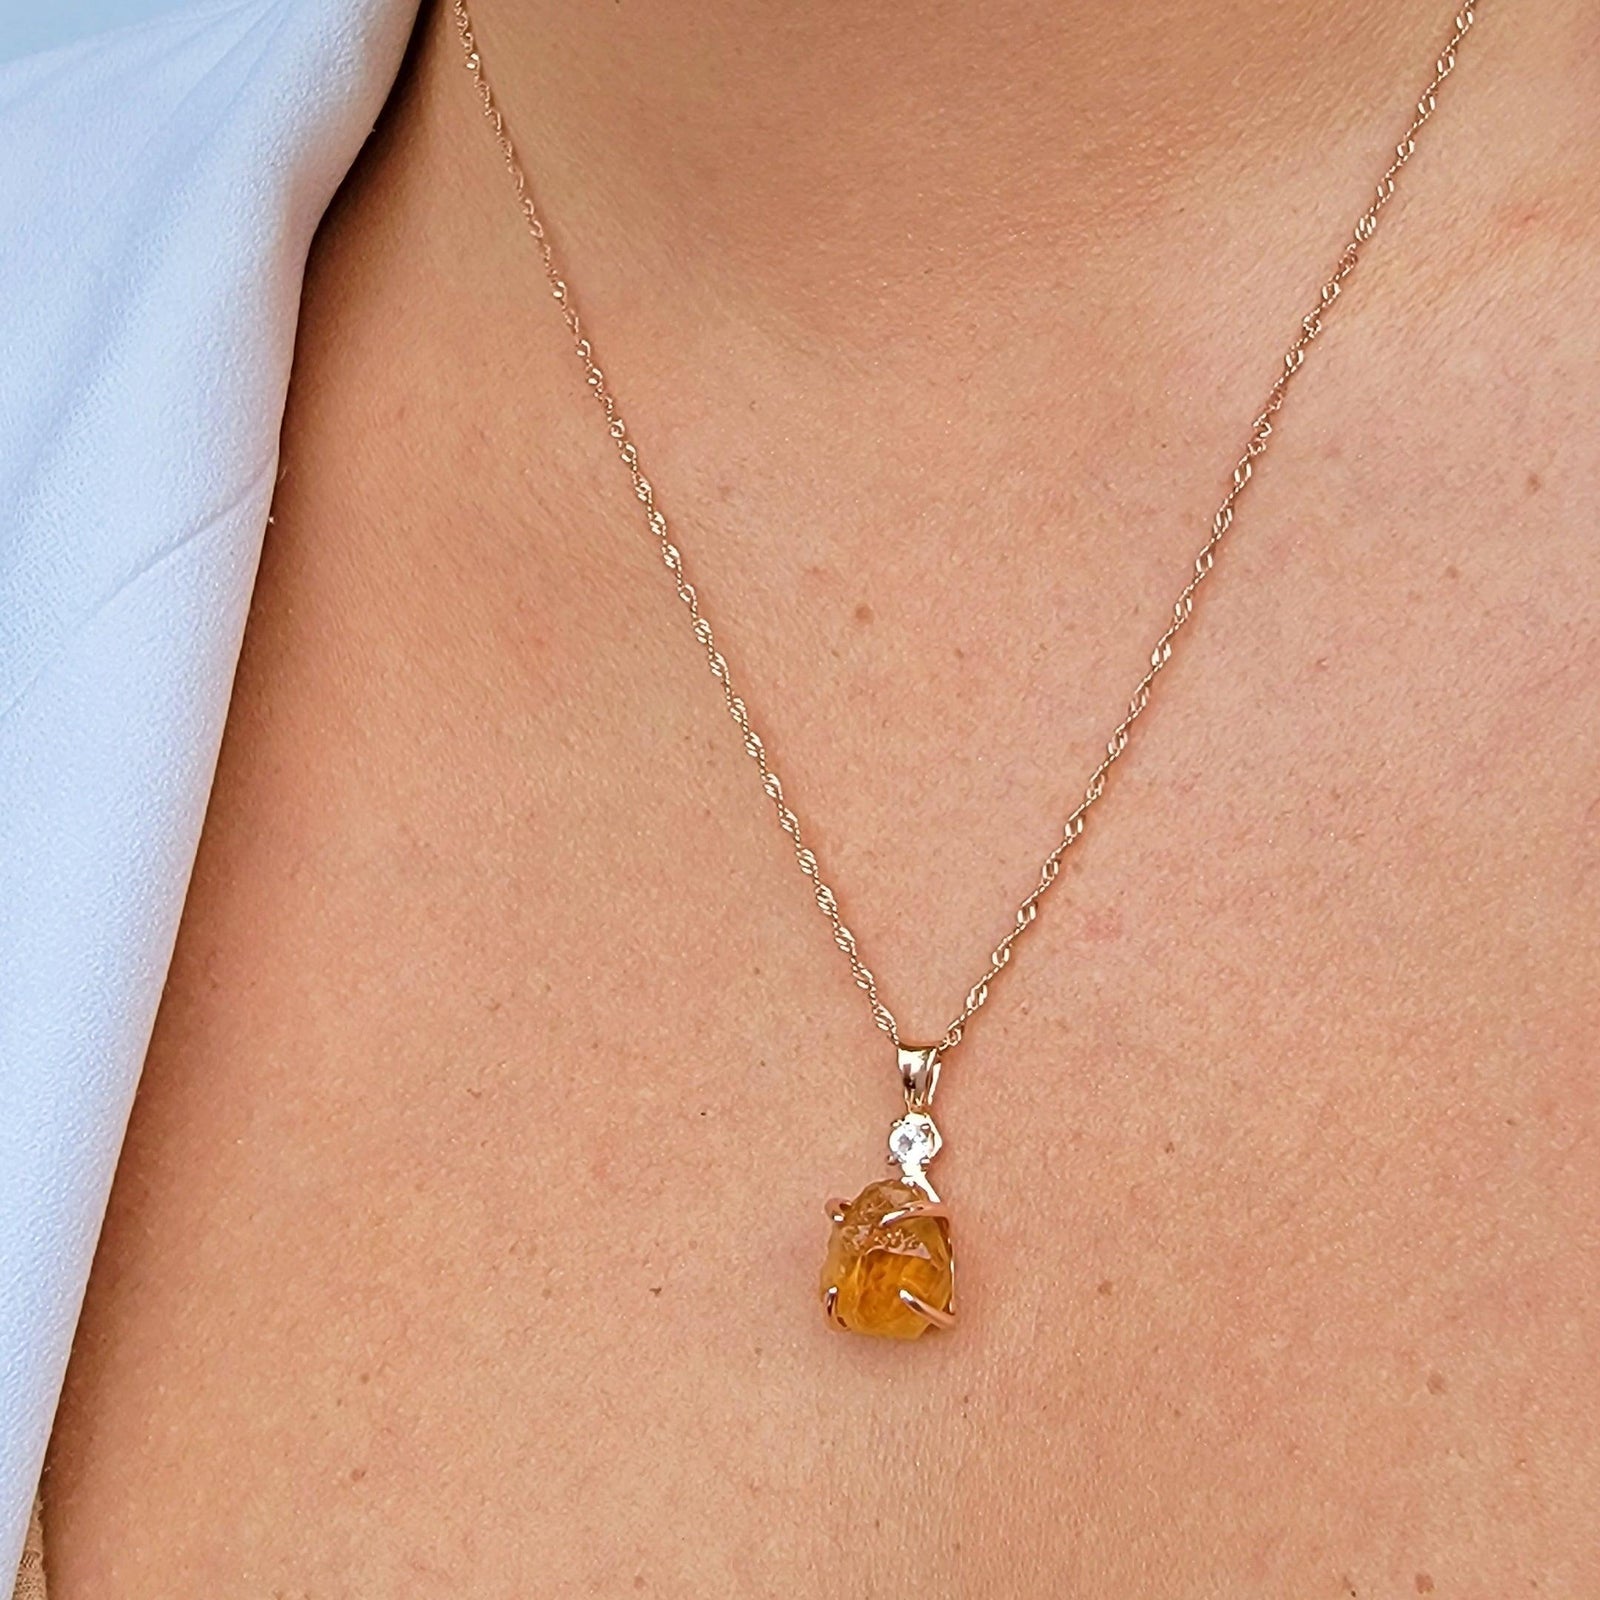 Raw Citrine Necklace - Yellow Crystal Point Pendant - Petite Natural (A50)  | eBay